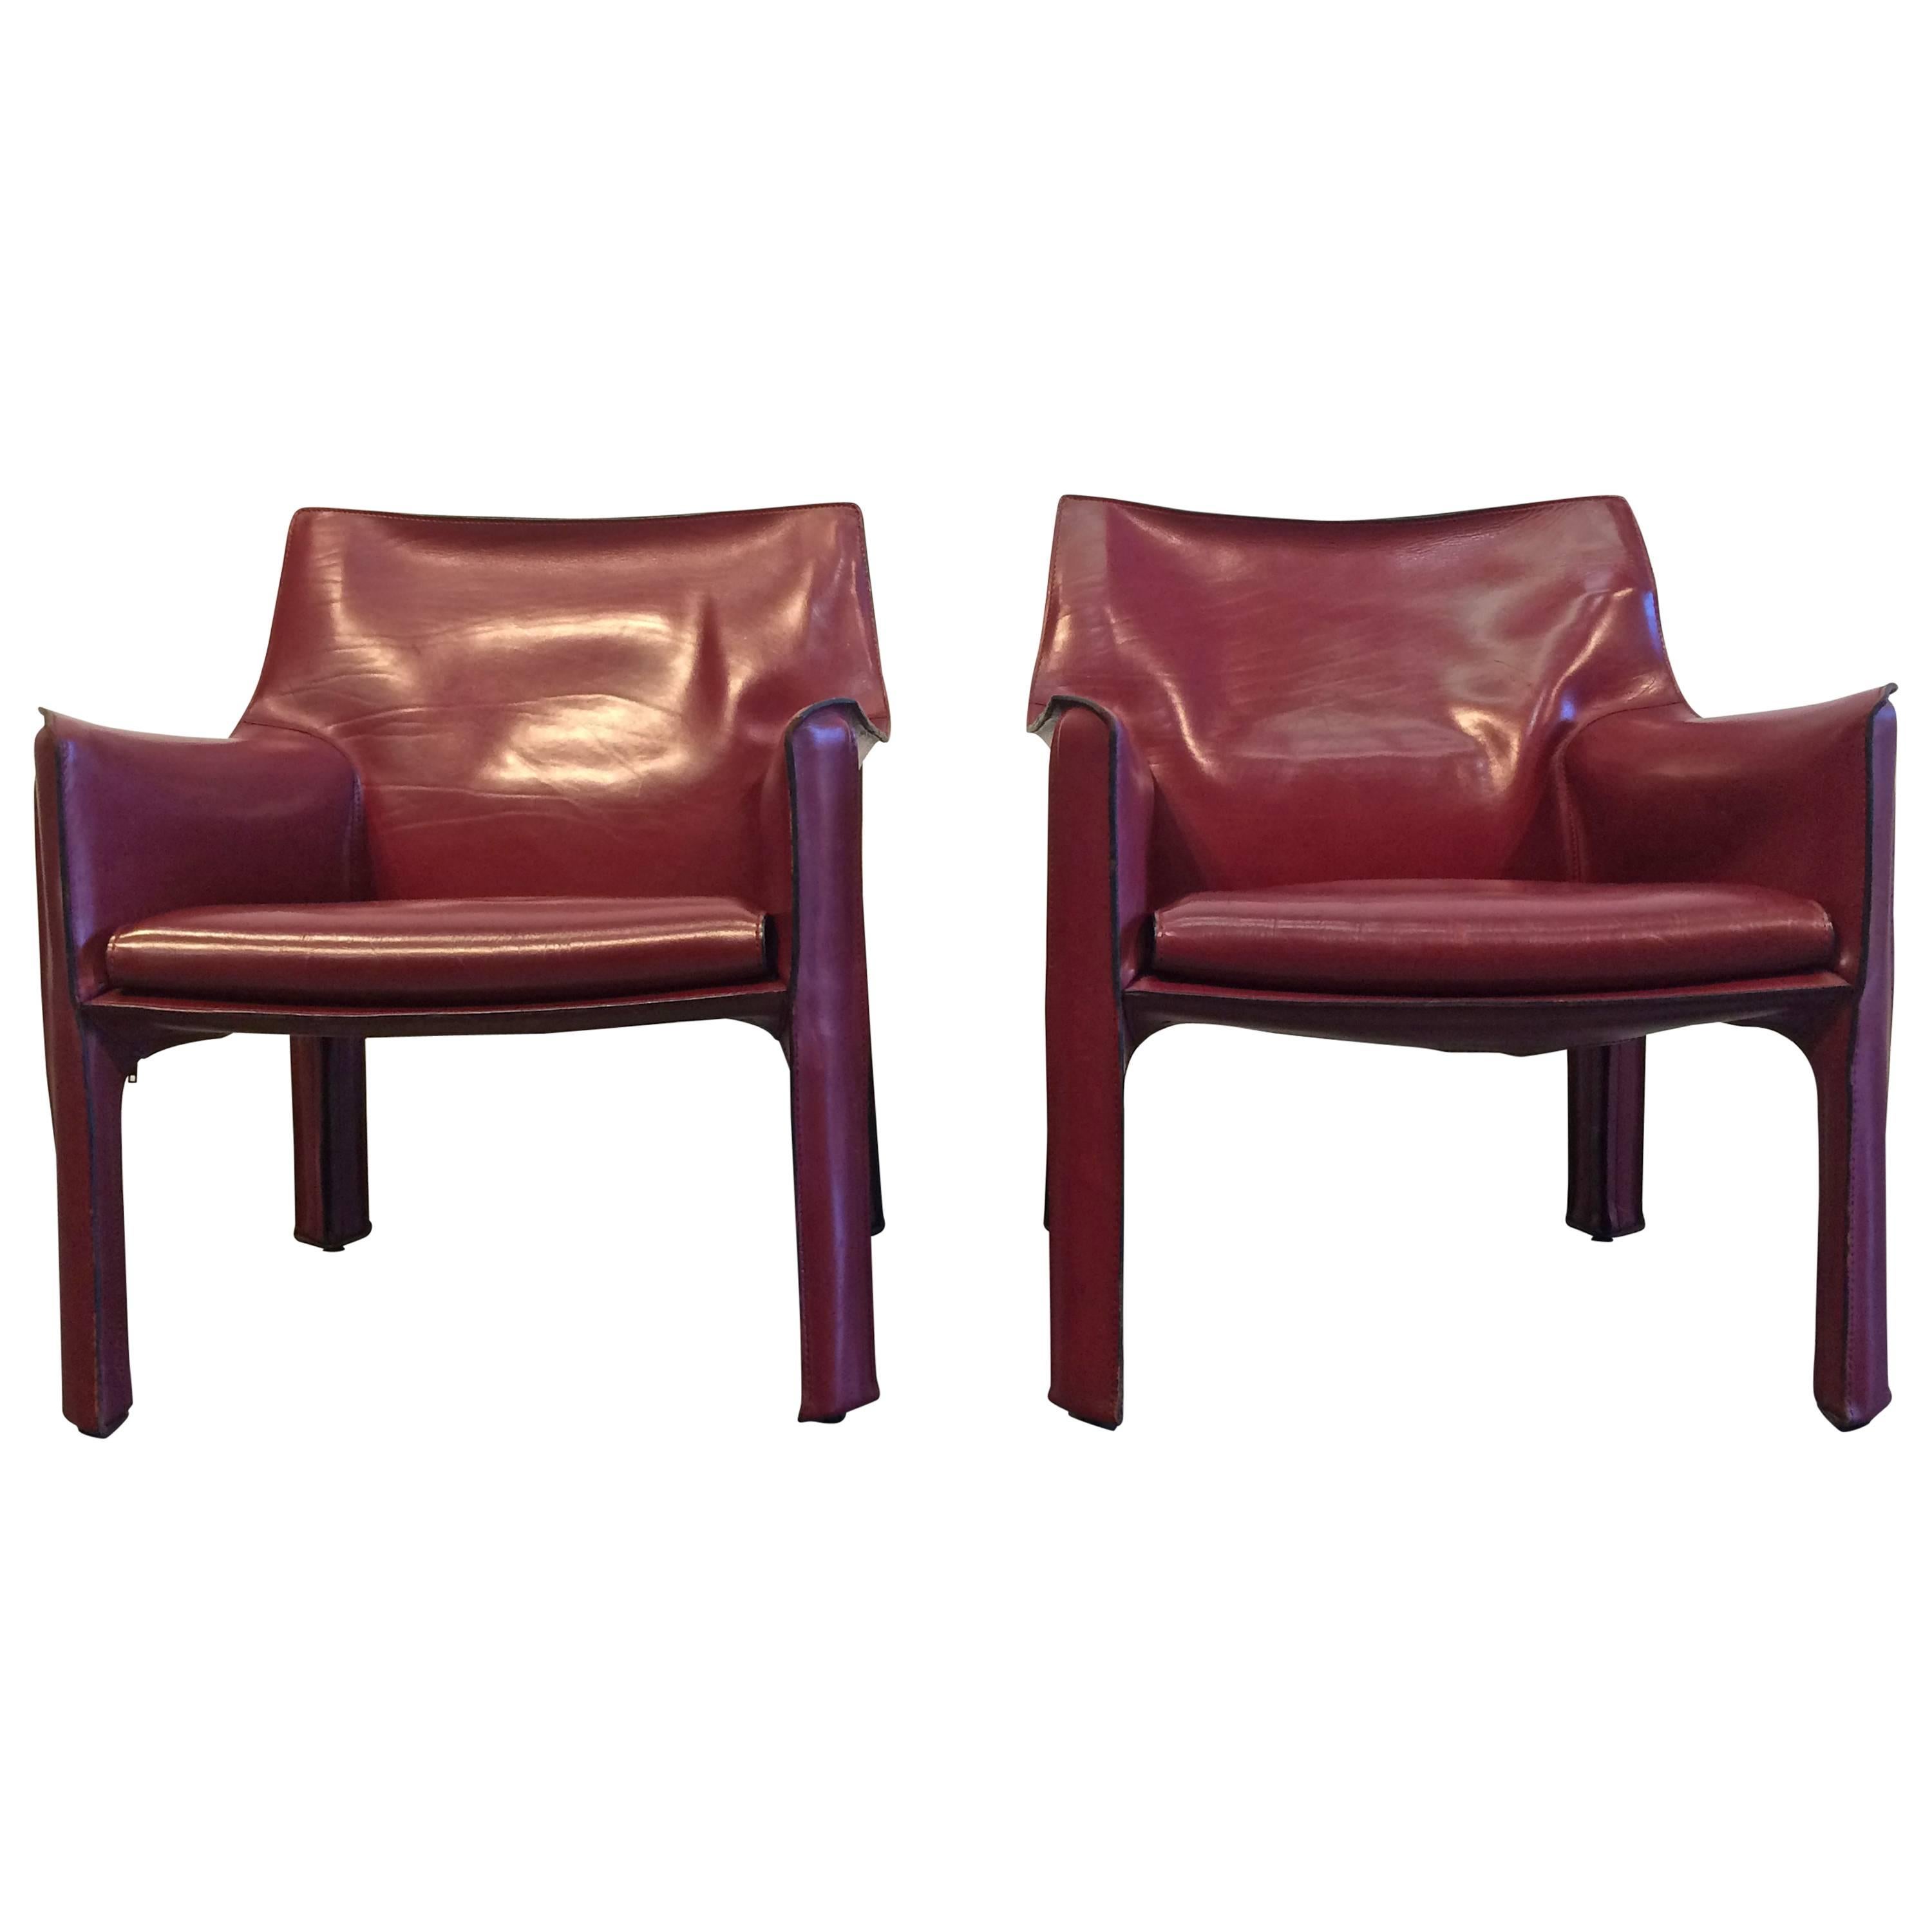 Pair of Cab Lounge Chairs by Mario Bellini for Cassina